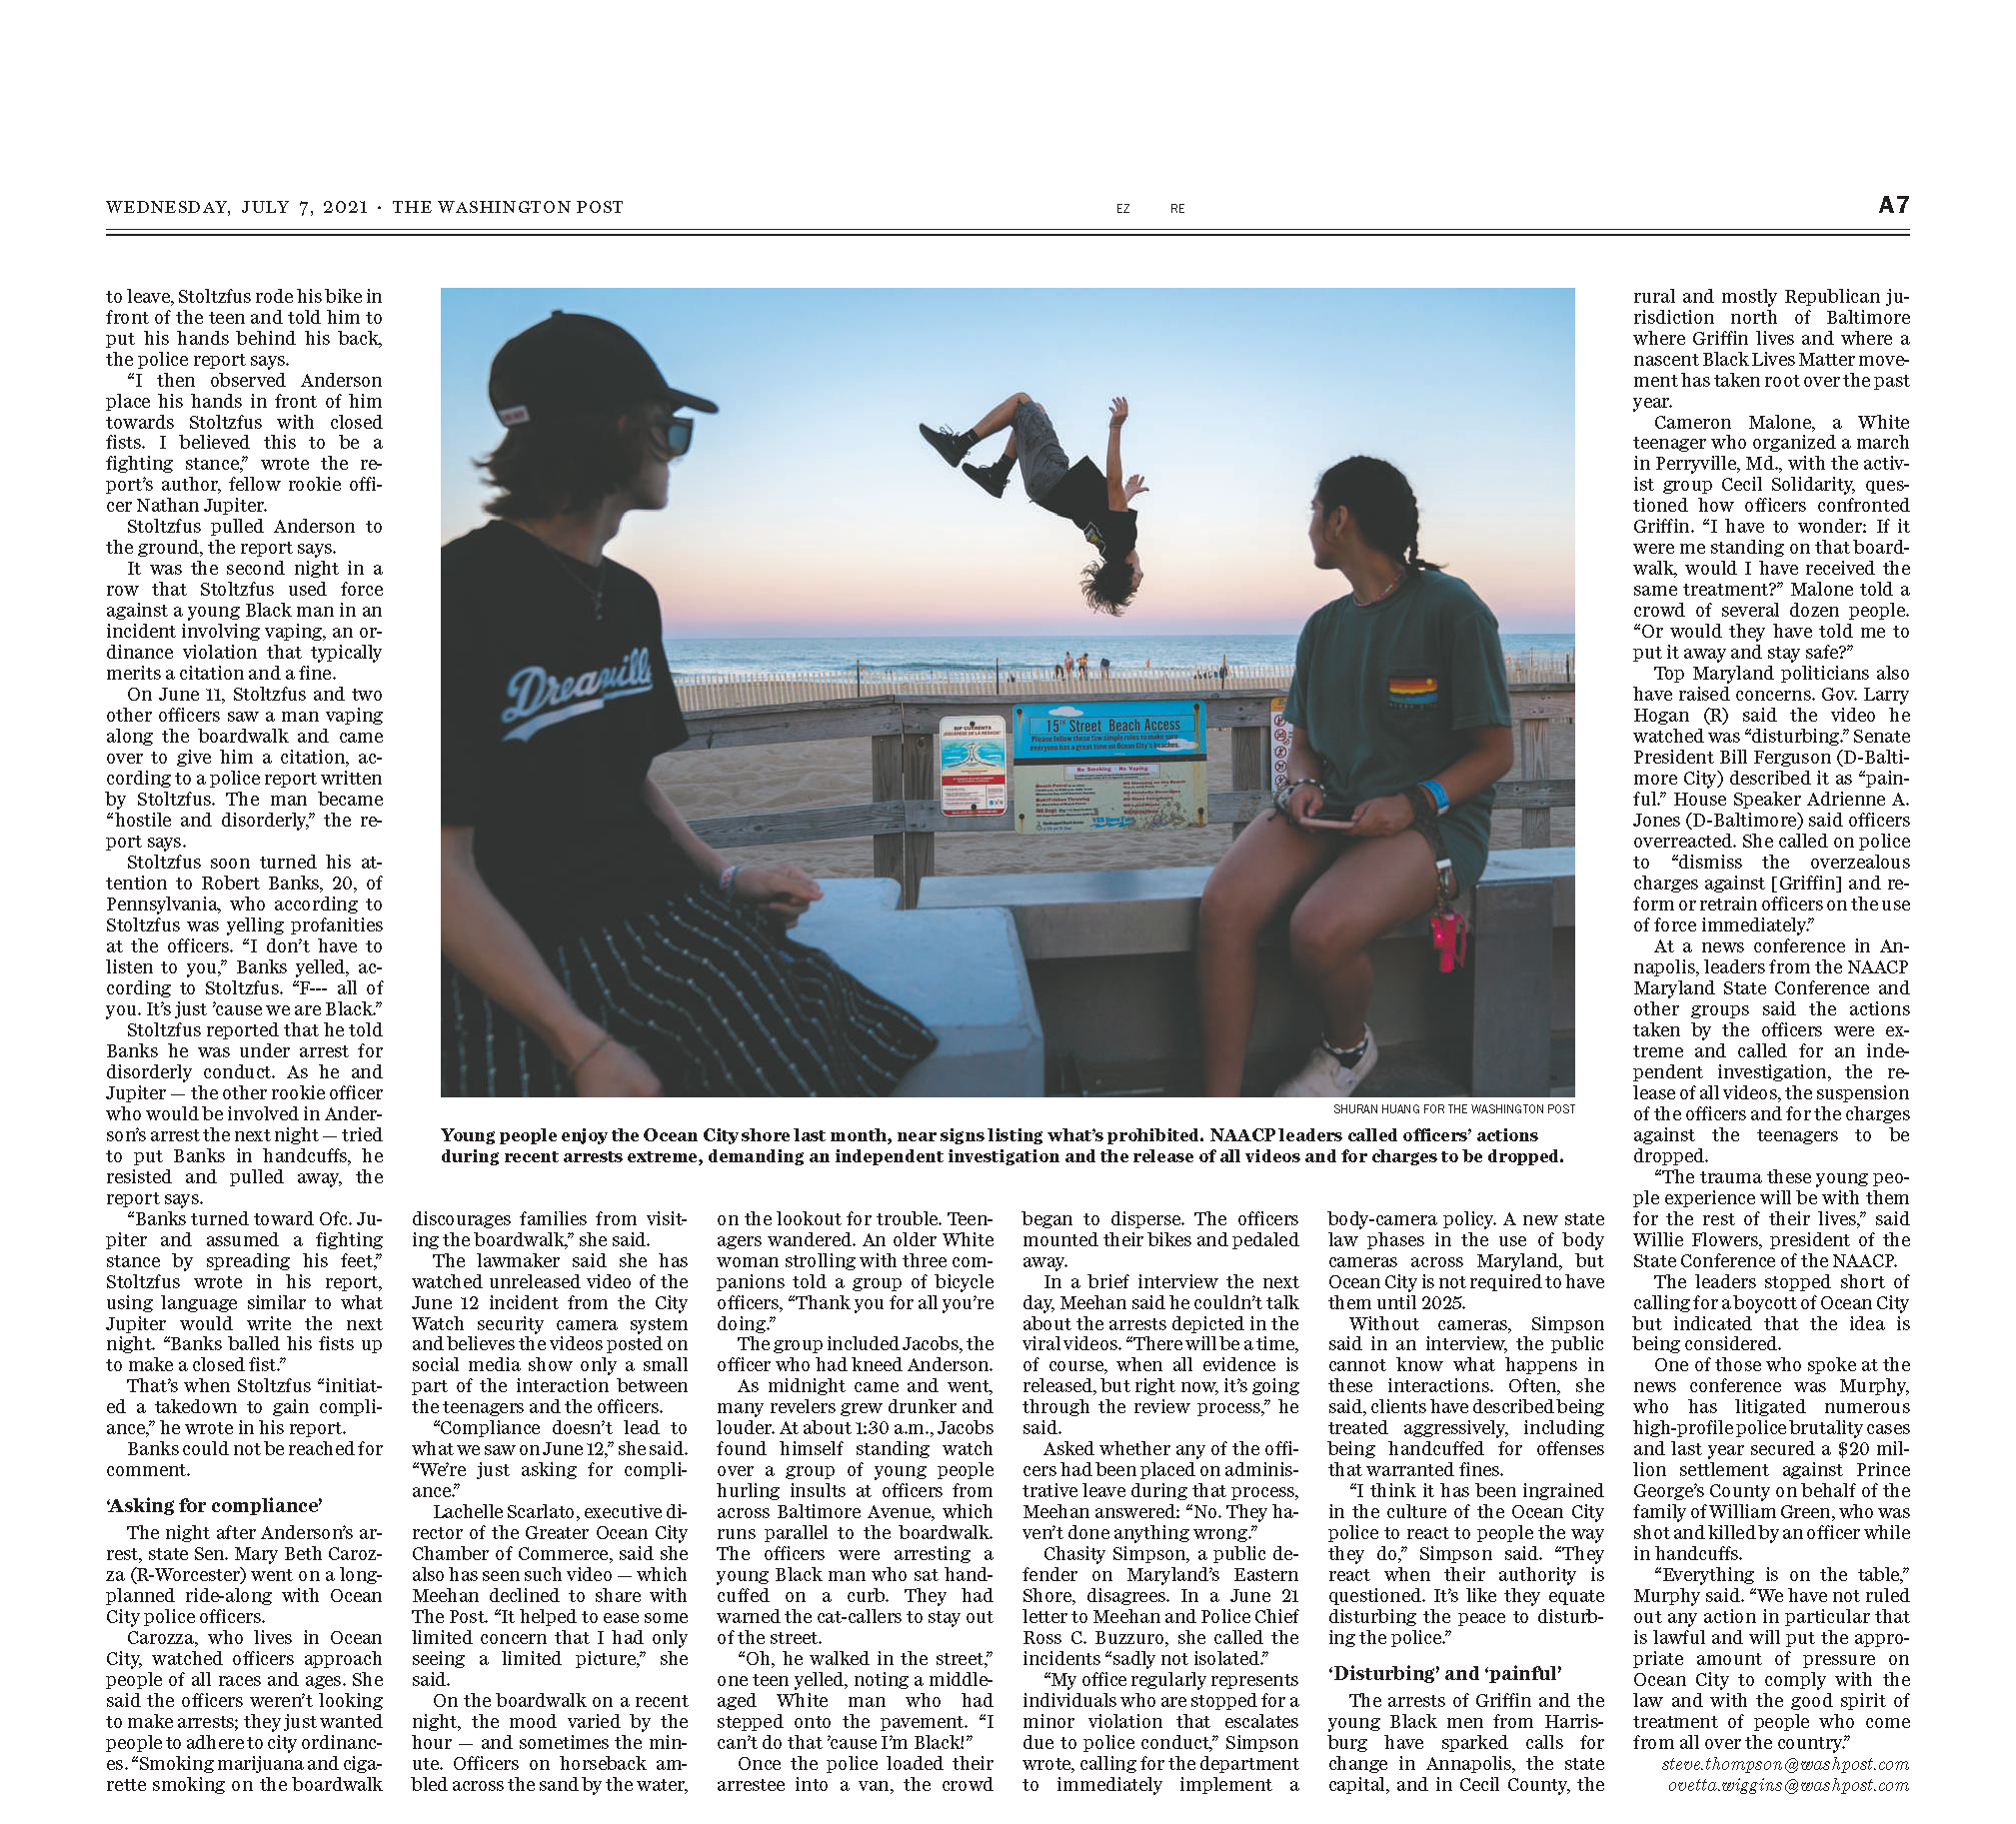 Image from Tear Sheets -    For  The Washington Post  Ocean City boardwalk:...